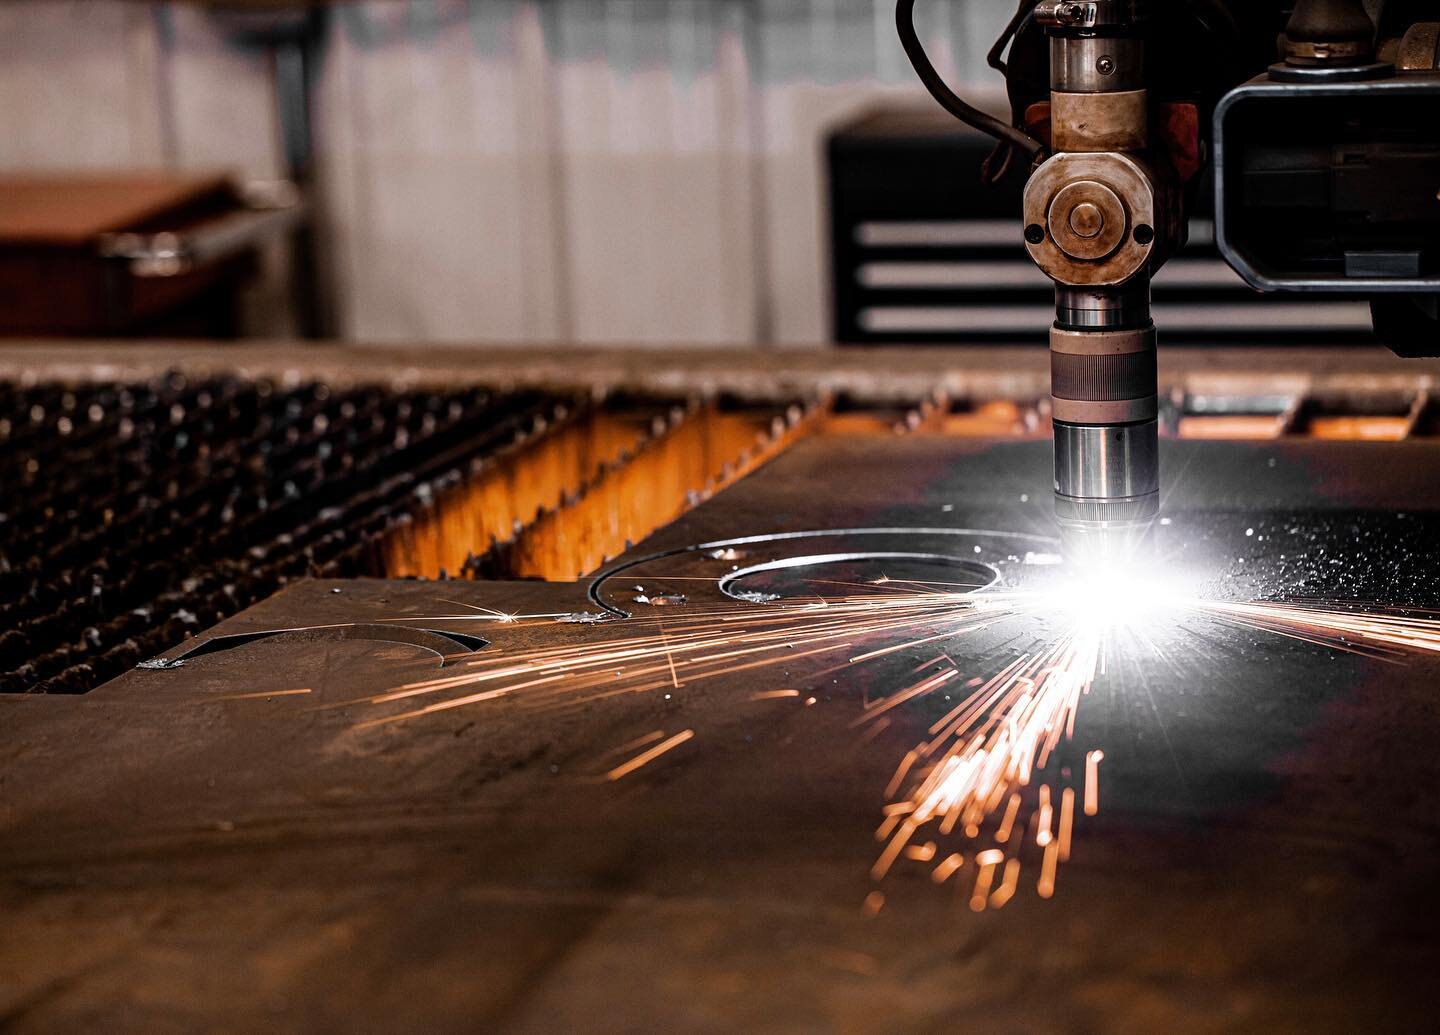 Our CNC plasma table is certainly our most valuable machine! 

It allows for complexity to be a part of our normal design process. 

.
.
.
.
.
.
.
.
.
.
#weldinglife 
#homedecorideas 
#calgarylife 
#alberta 
#canadianmade 
#explorecalgary 
#ruralalbe